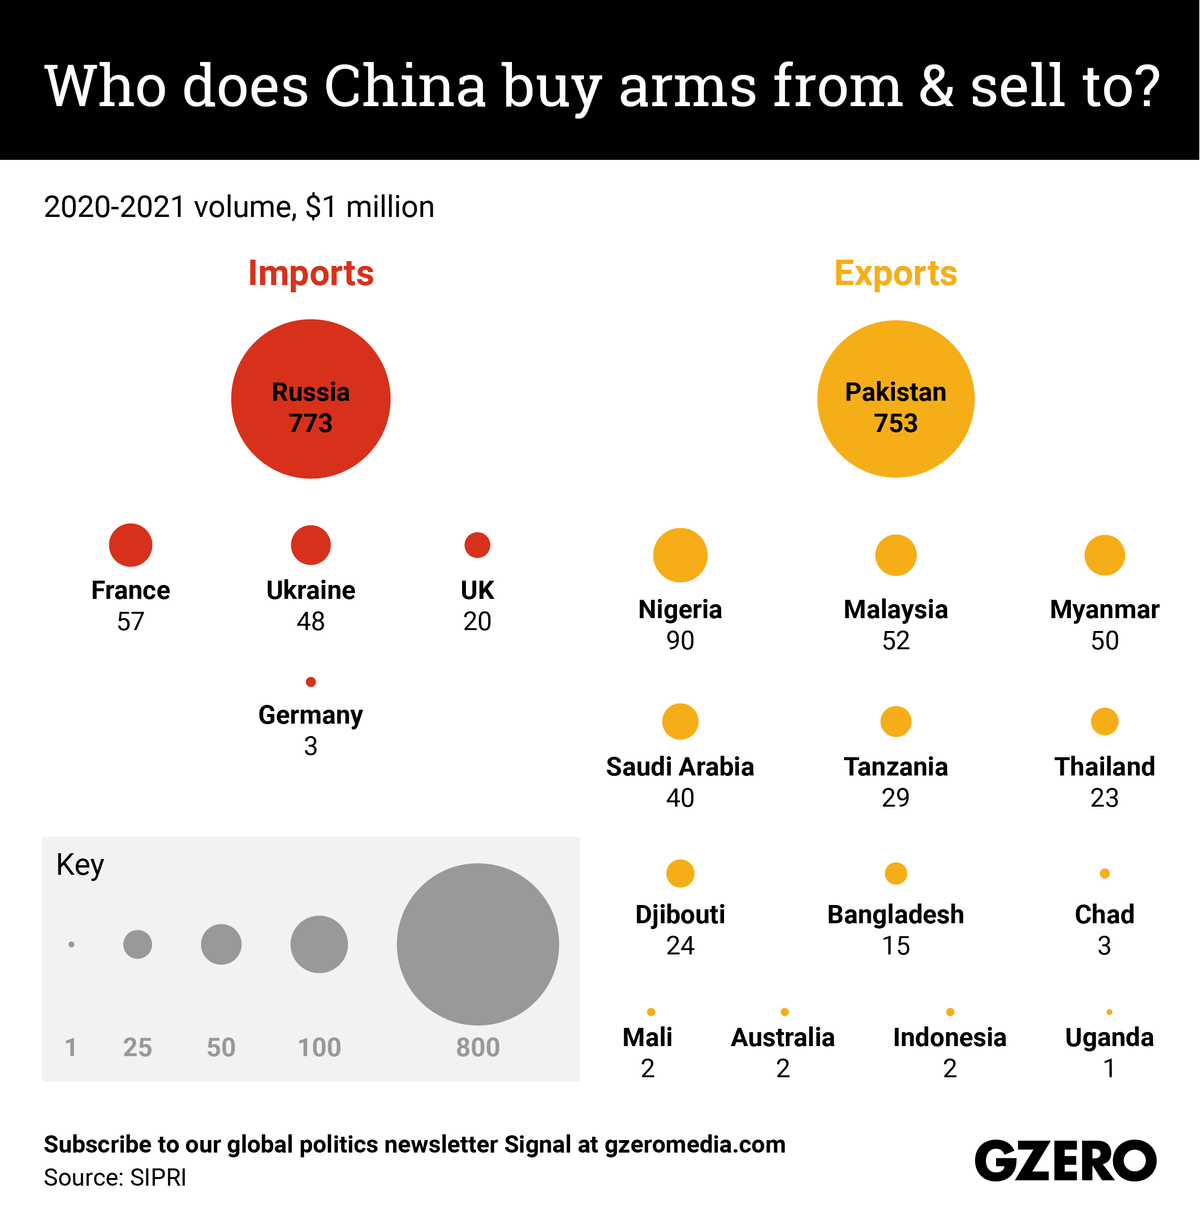 The Graphic Truth: Who does China buy arms from & sell to?